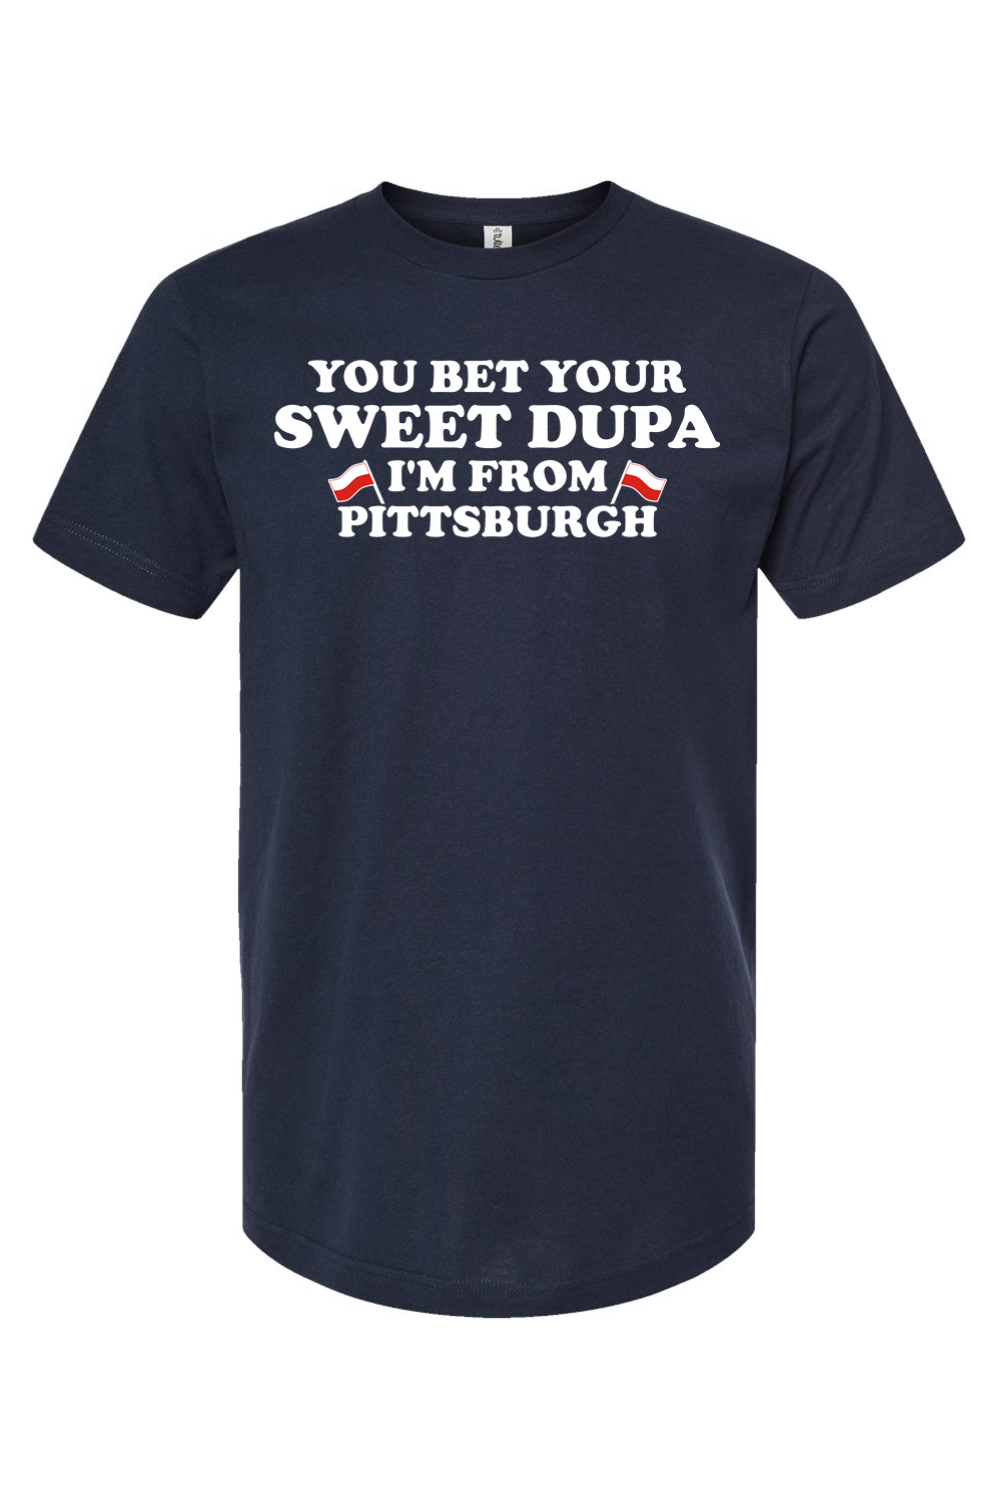 You Bet Your Sweet Dupa I'm From Pittsburgh - Yinzylvania